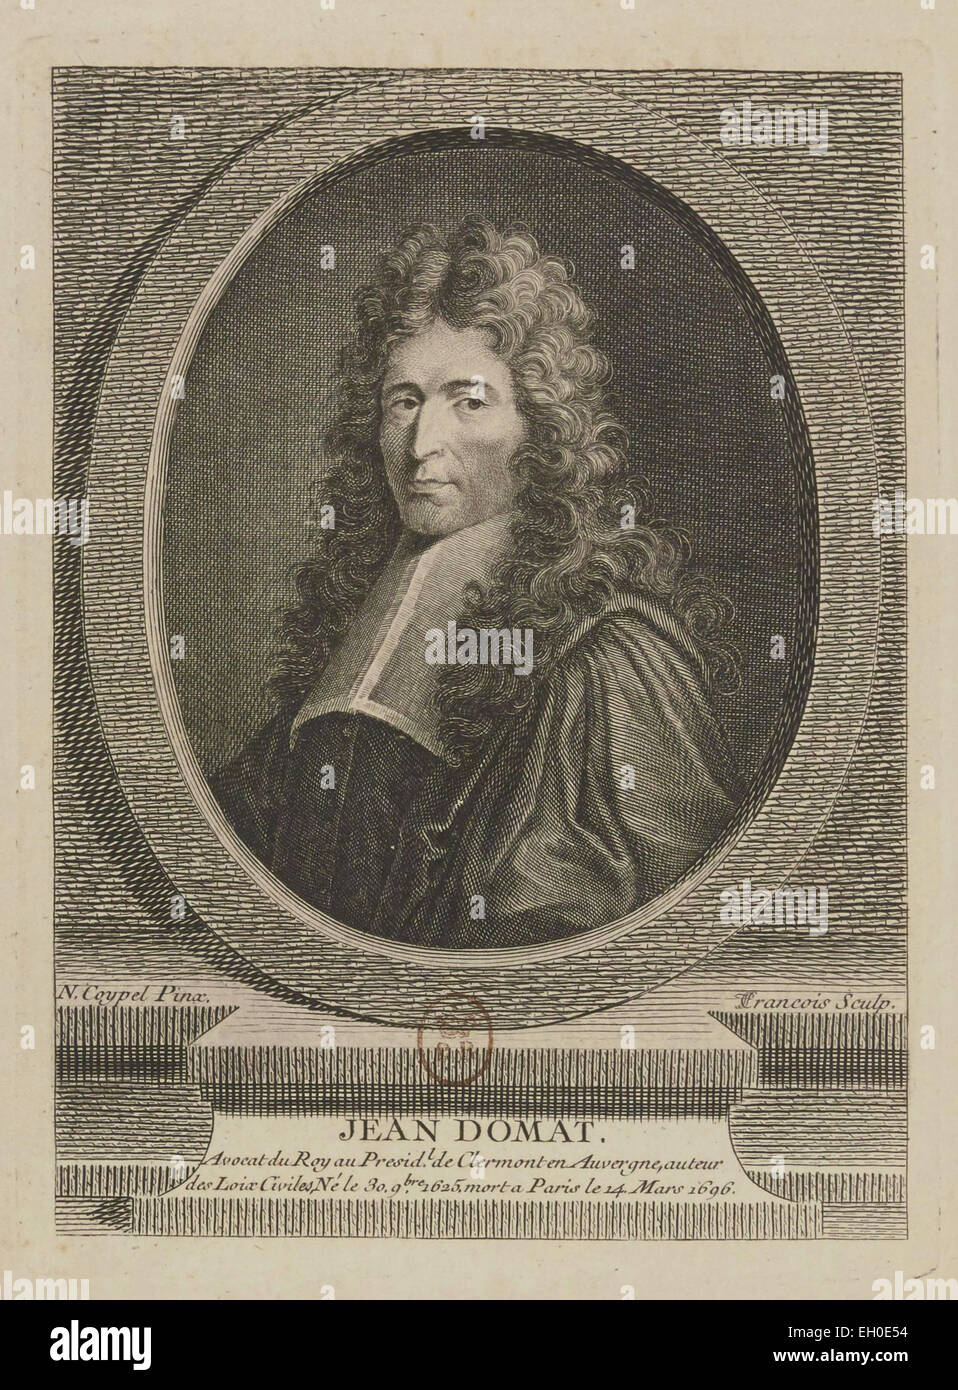 Jean Domat (1625 - 1696), french lawyer. Stock Photo